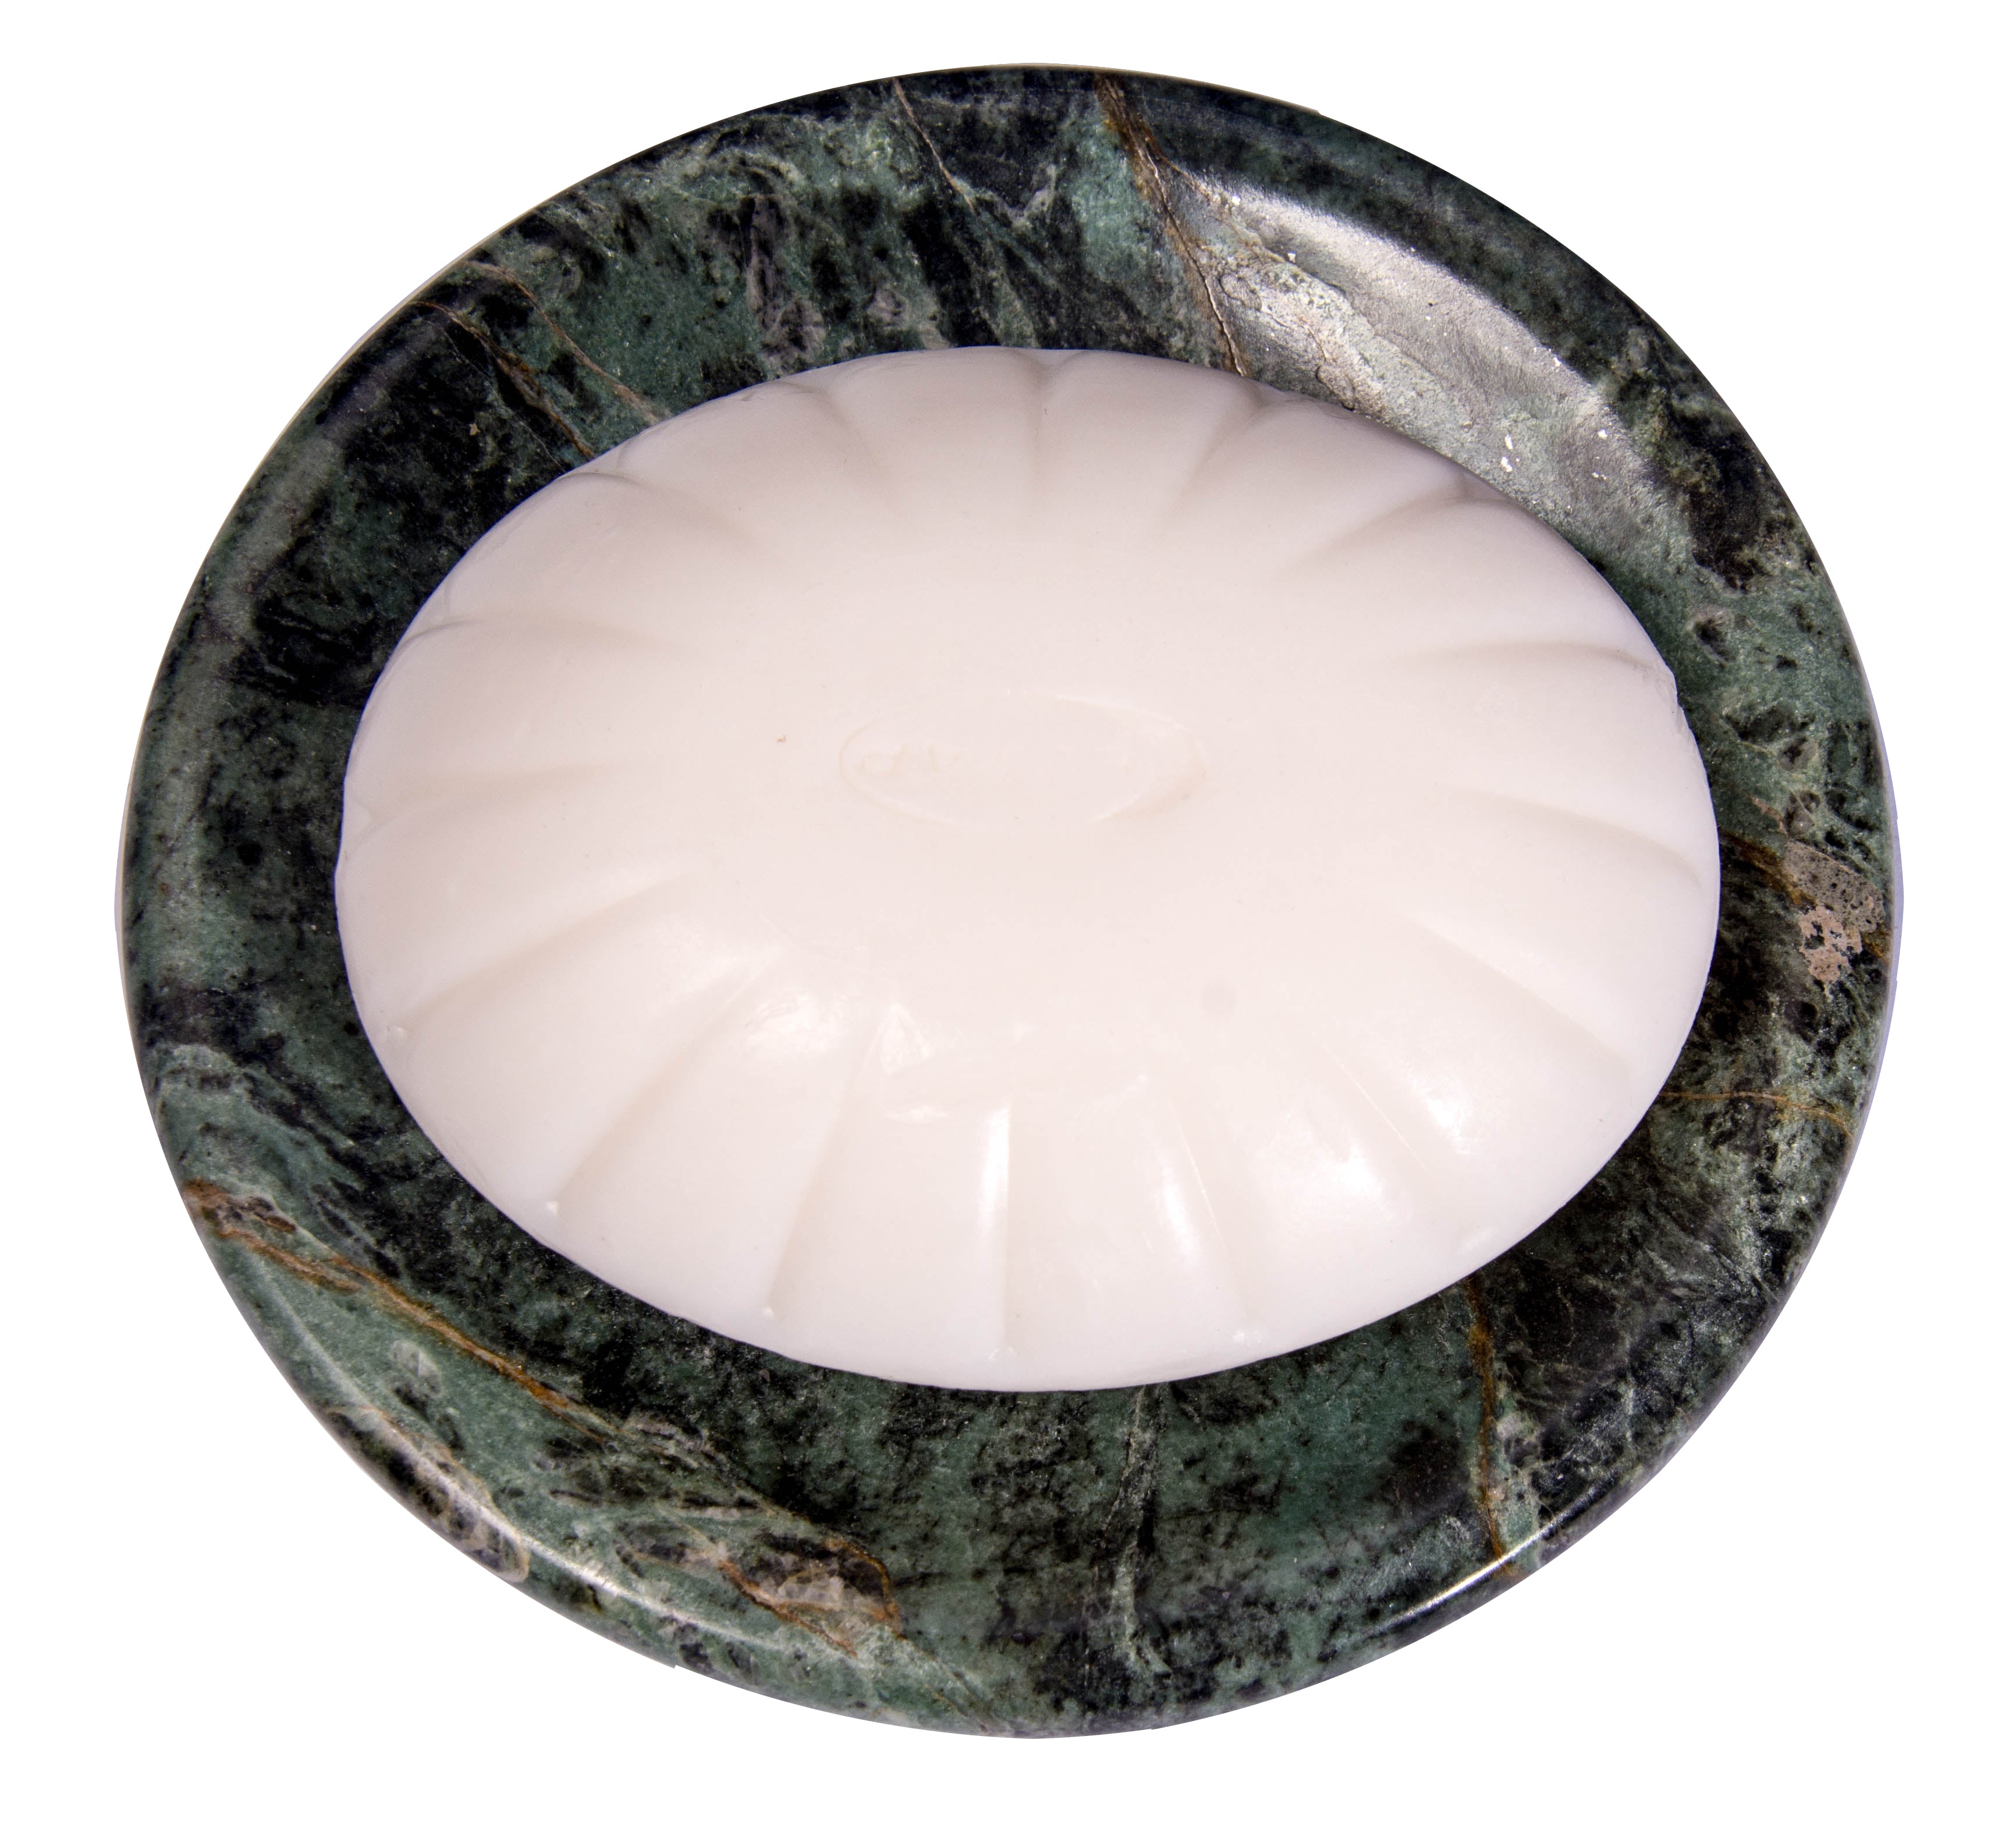 Green Marble Soap Dish - Polished and Shiny Marble Dish Holder - Beautifully Crafted Bathroom Accessory - by CraftsOfEgypt